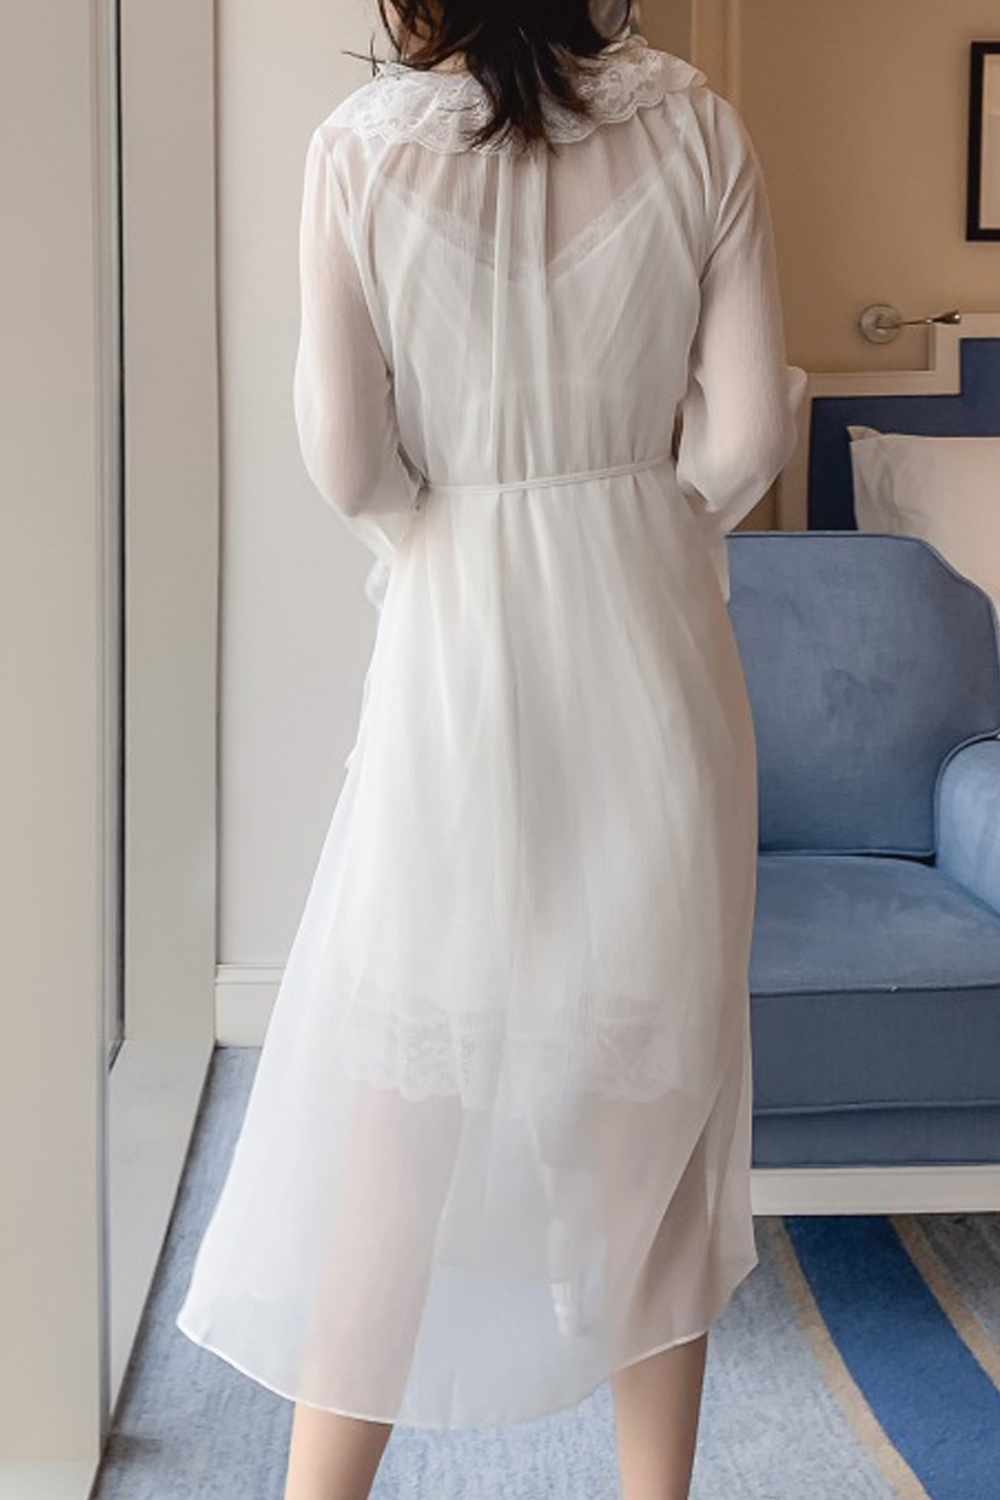 Selected Color is Two-Piece White Nightgown